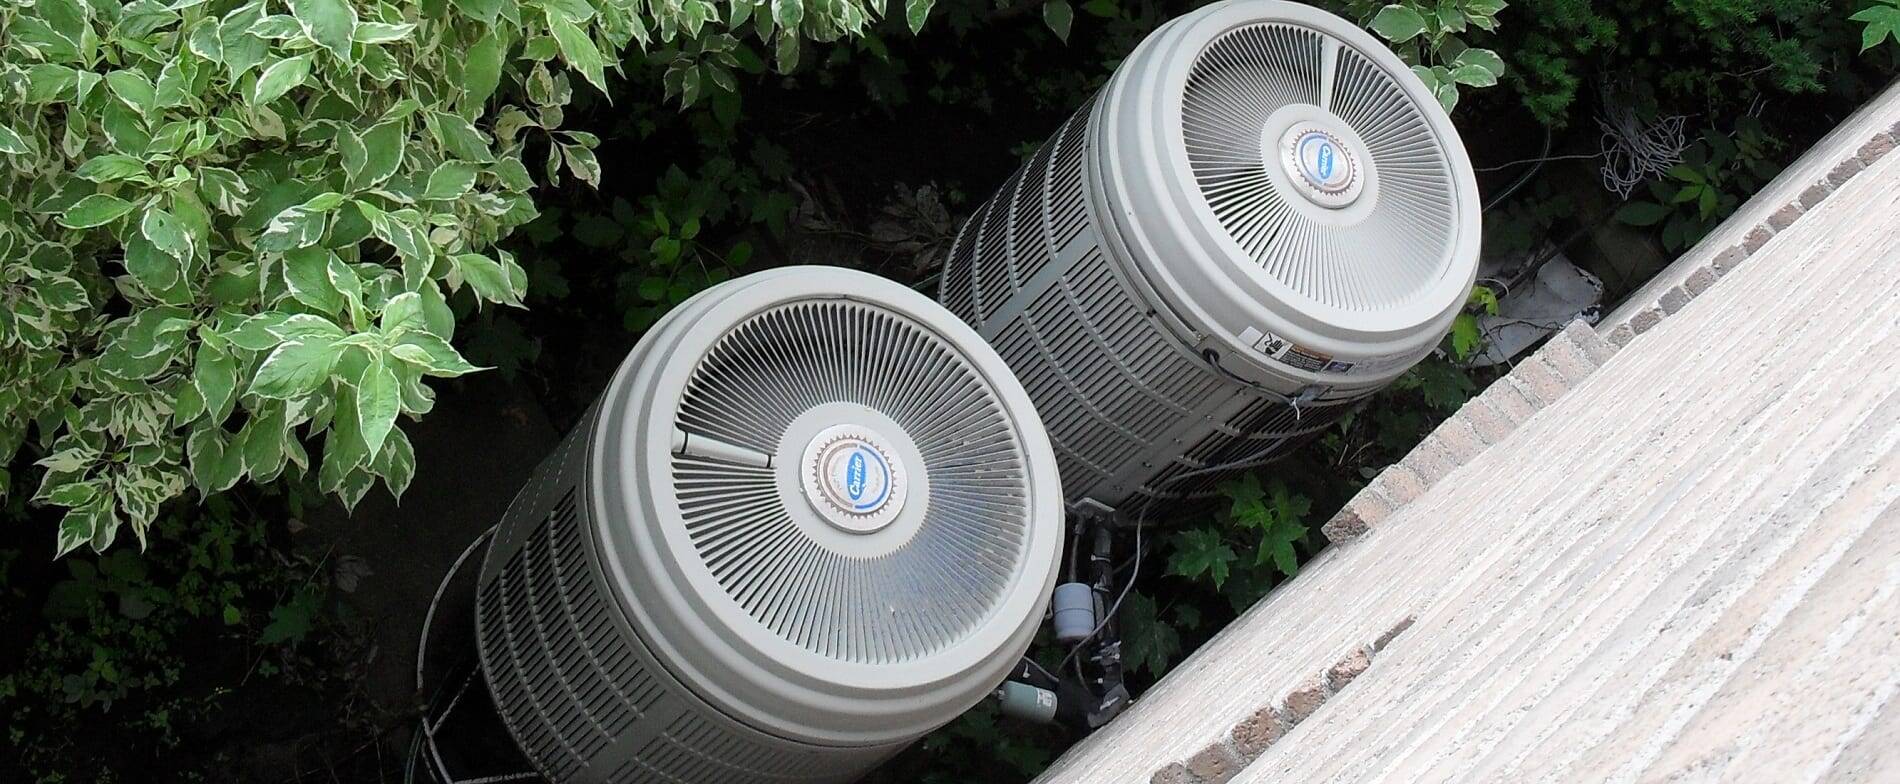 Retail market may solve heat pump affordability without policy changes